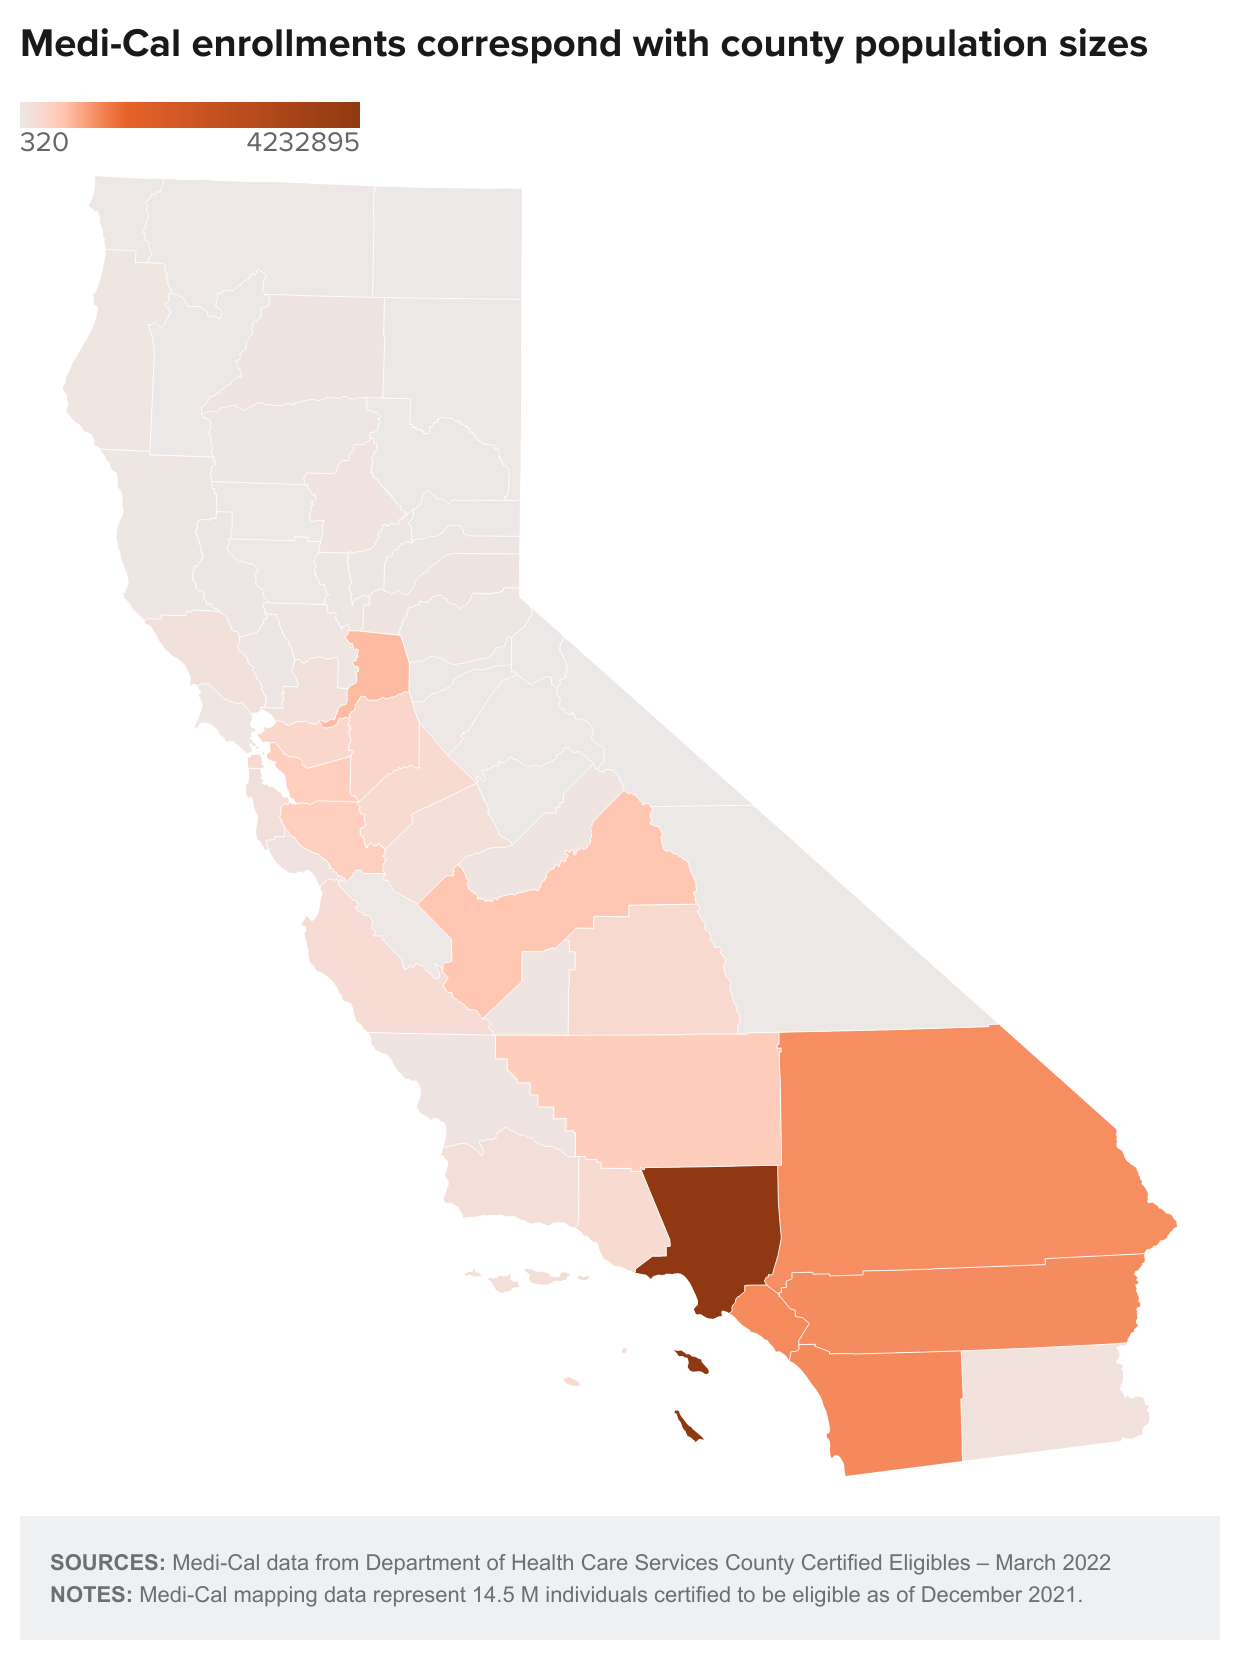 figure - Medi-Cal enrollments correspond with county population sizes